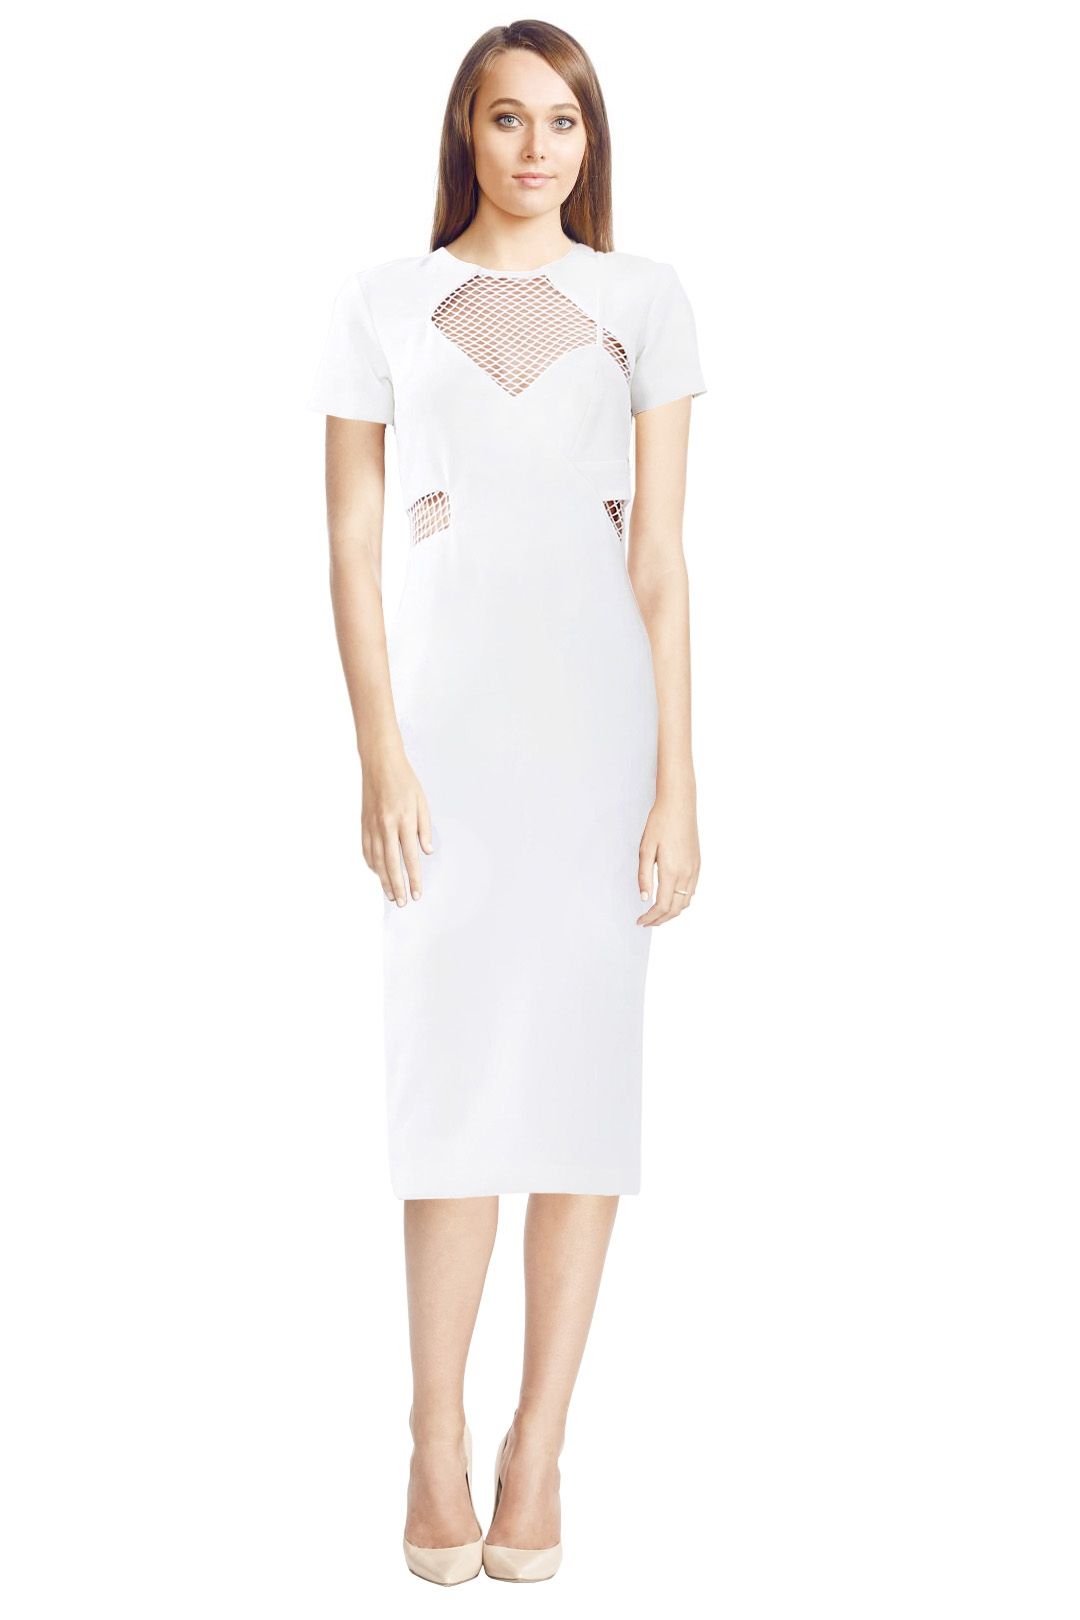 By Johnny - Discord Dress - White - Front